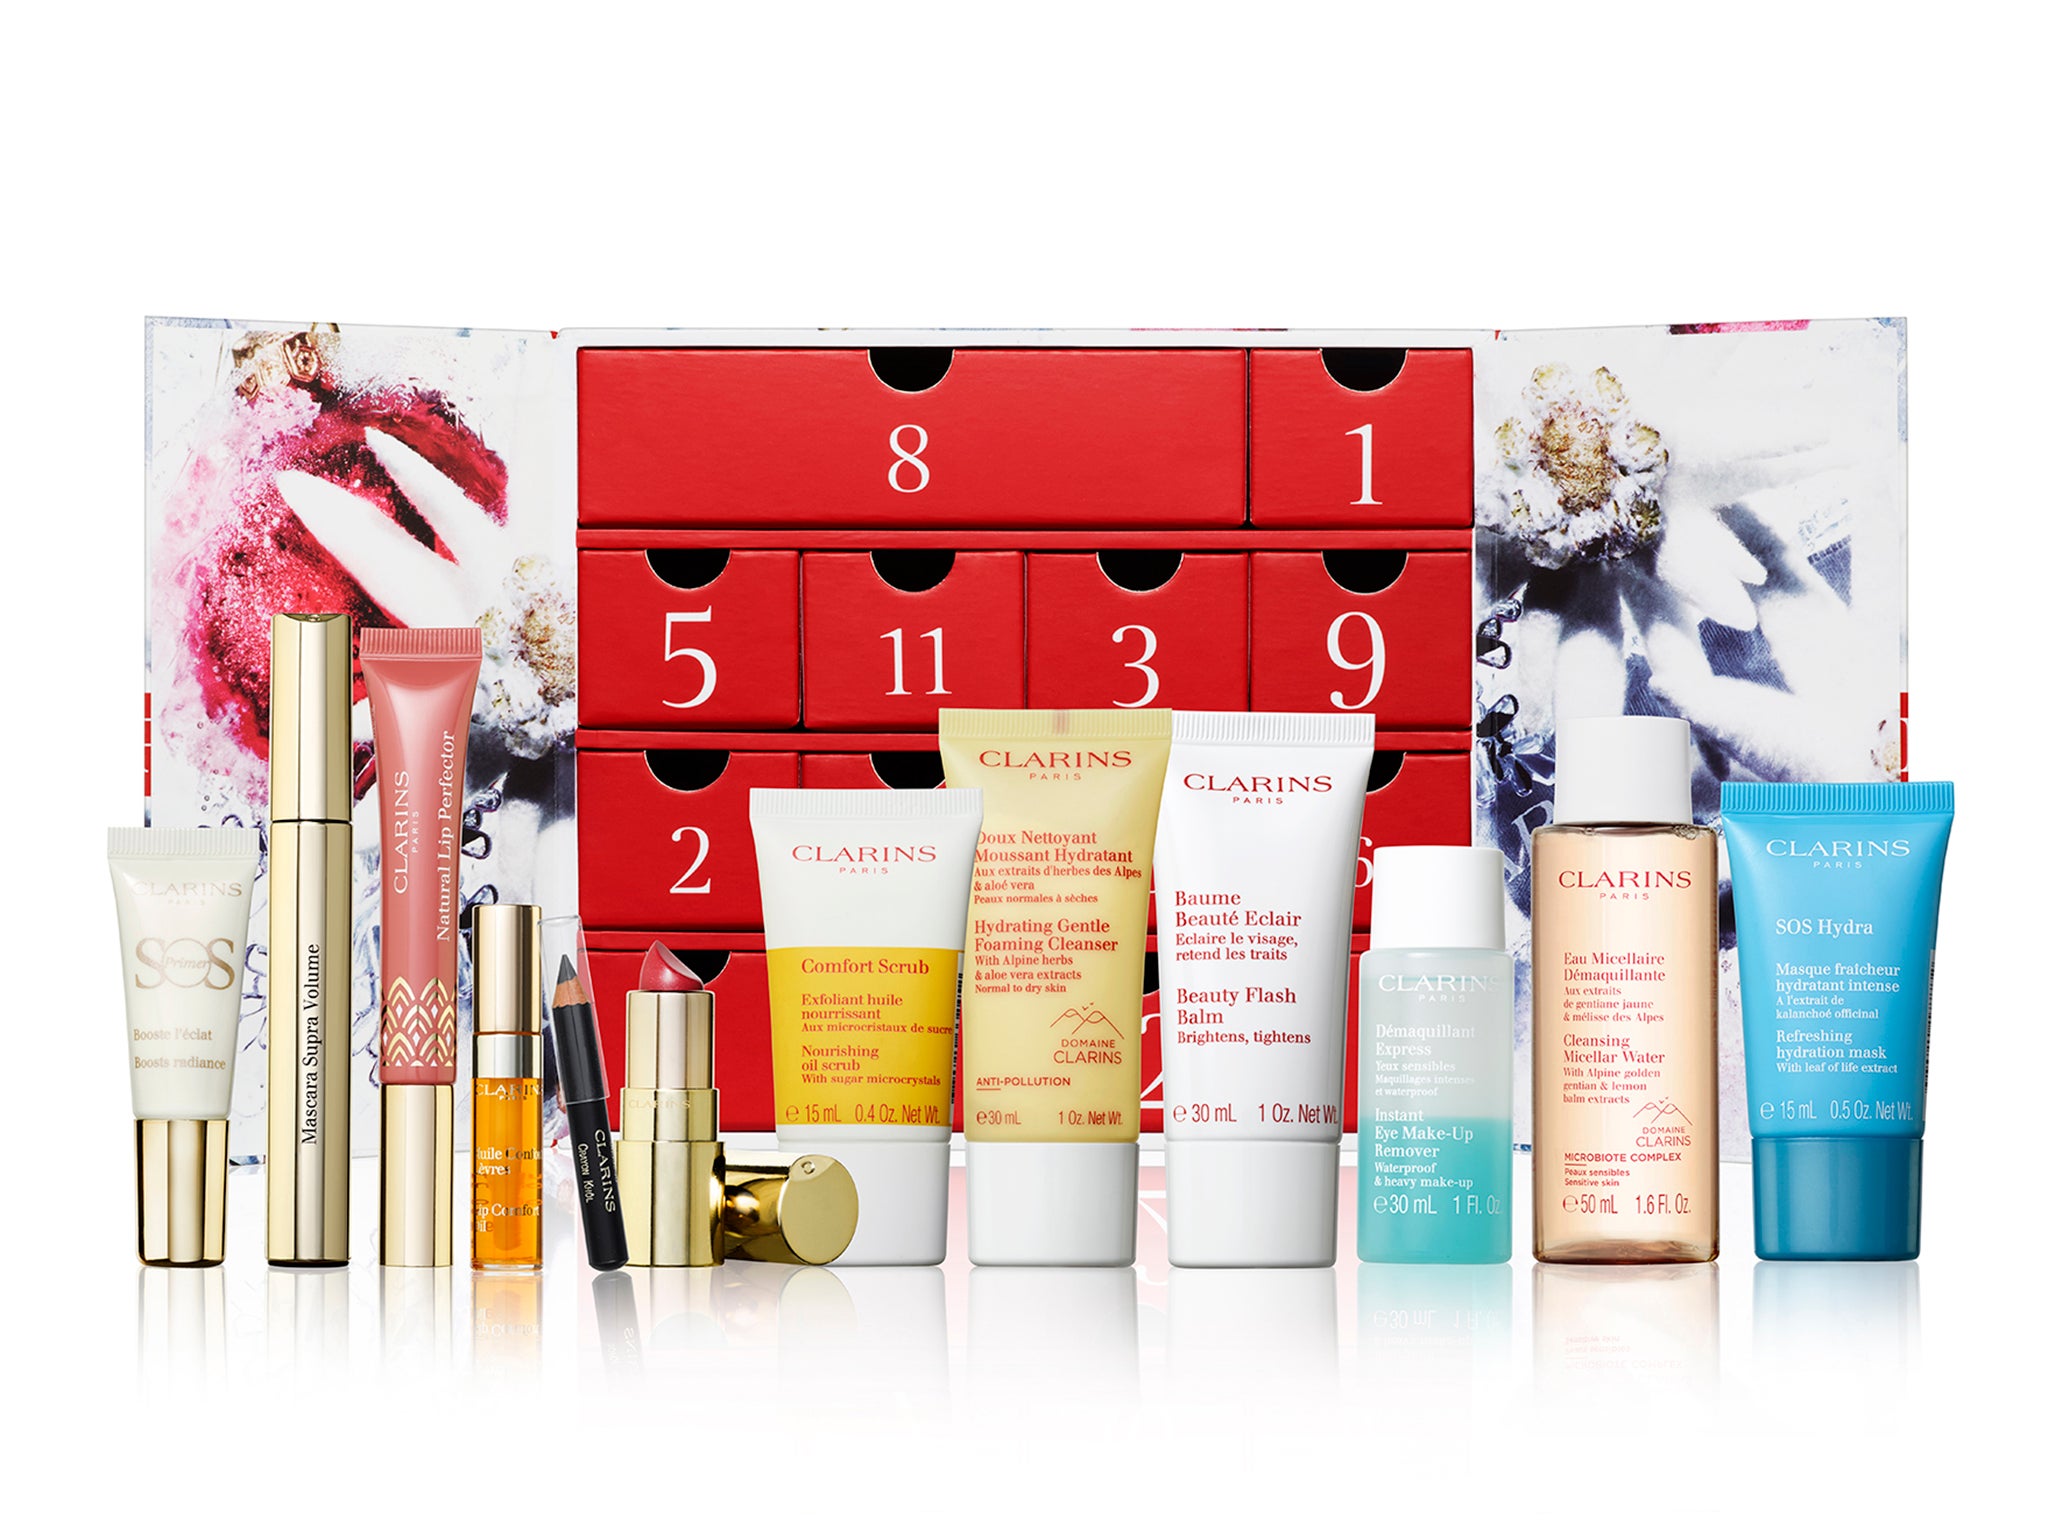 indybest-review-womens-Clarins-12-Day-Advent-Calendar.jpg